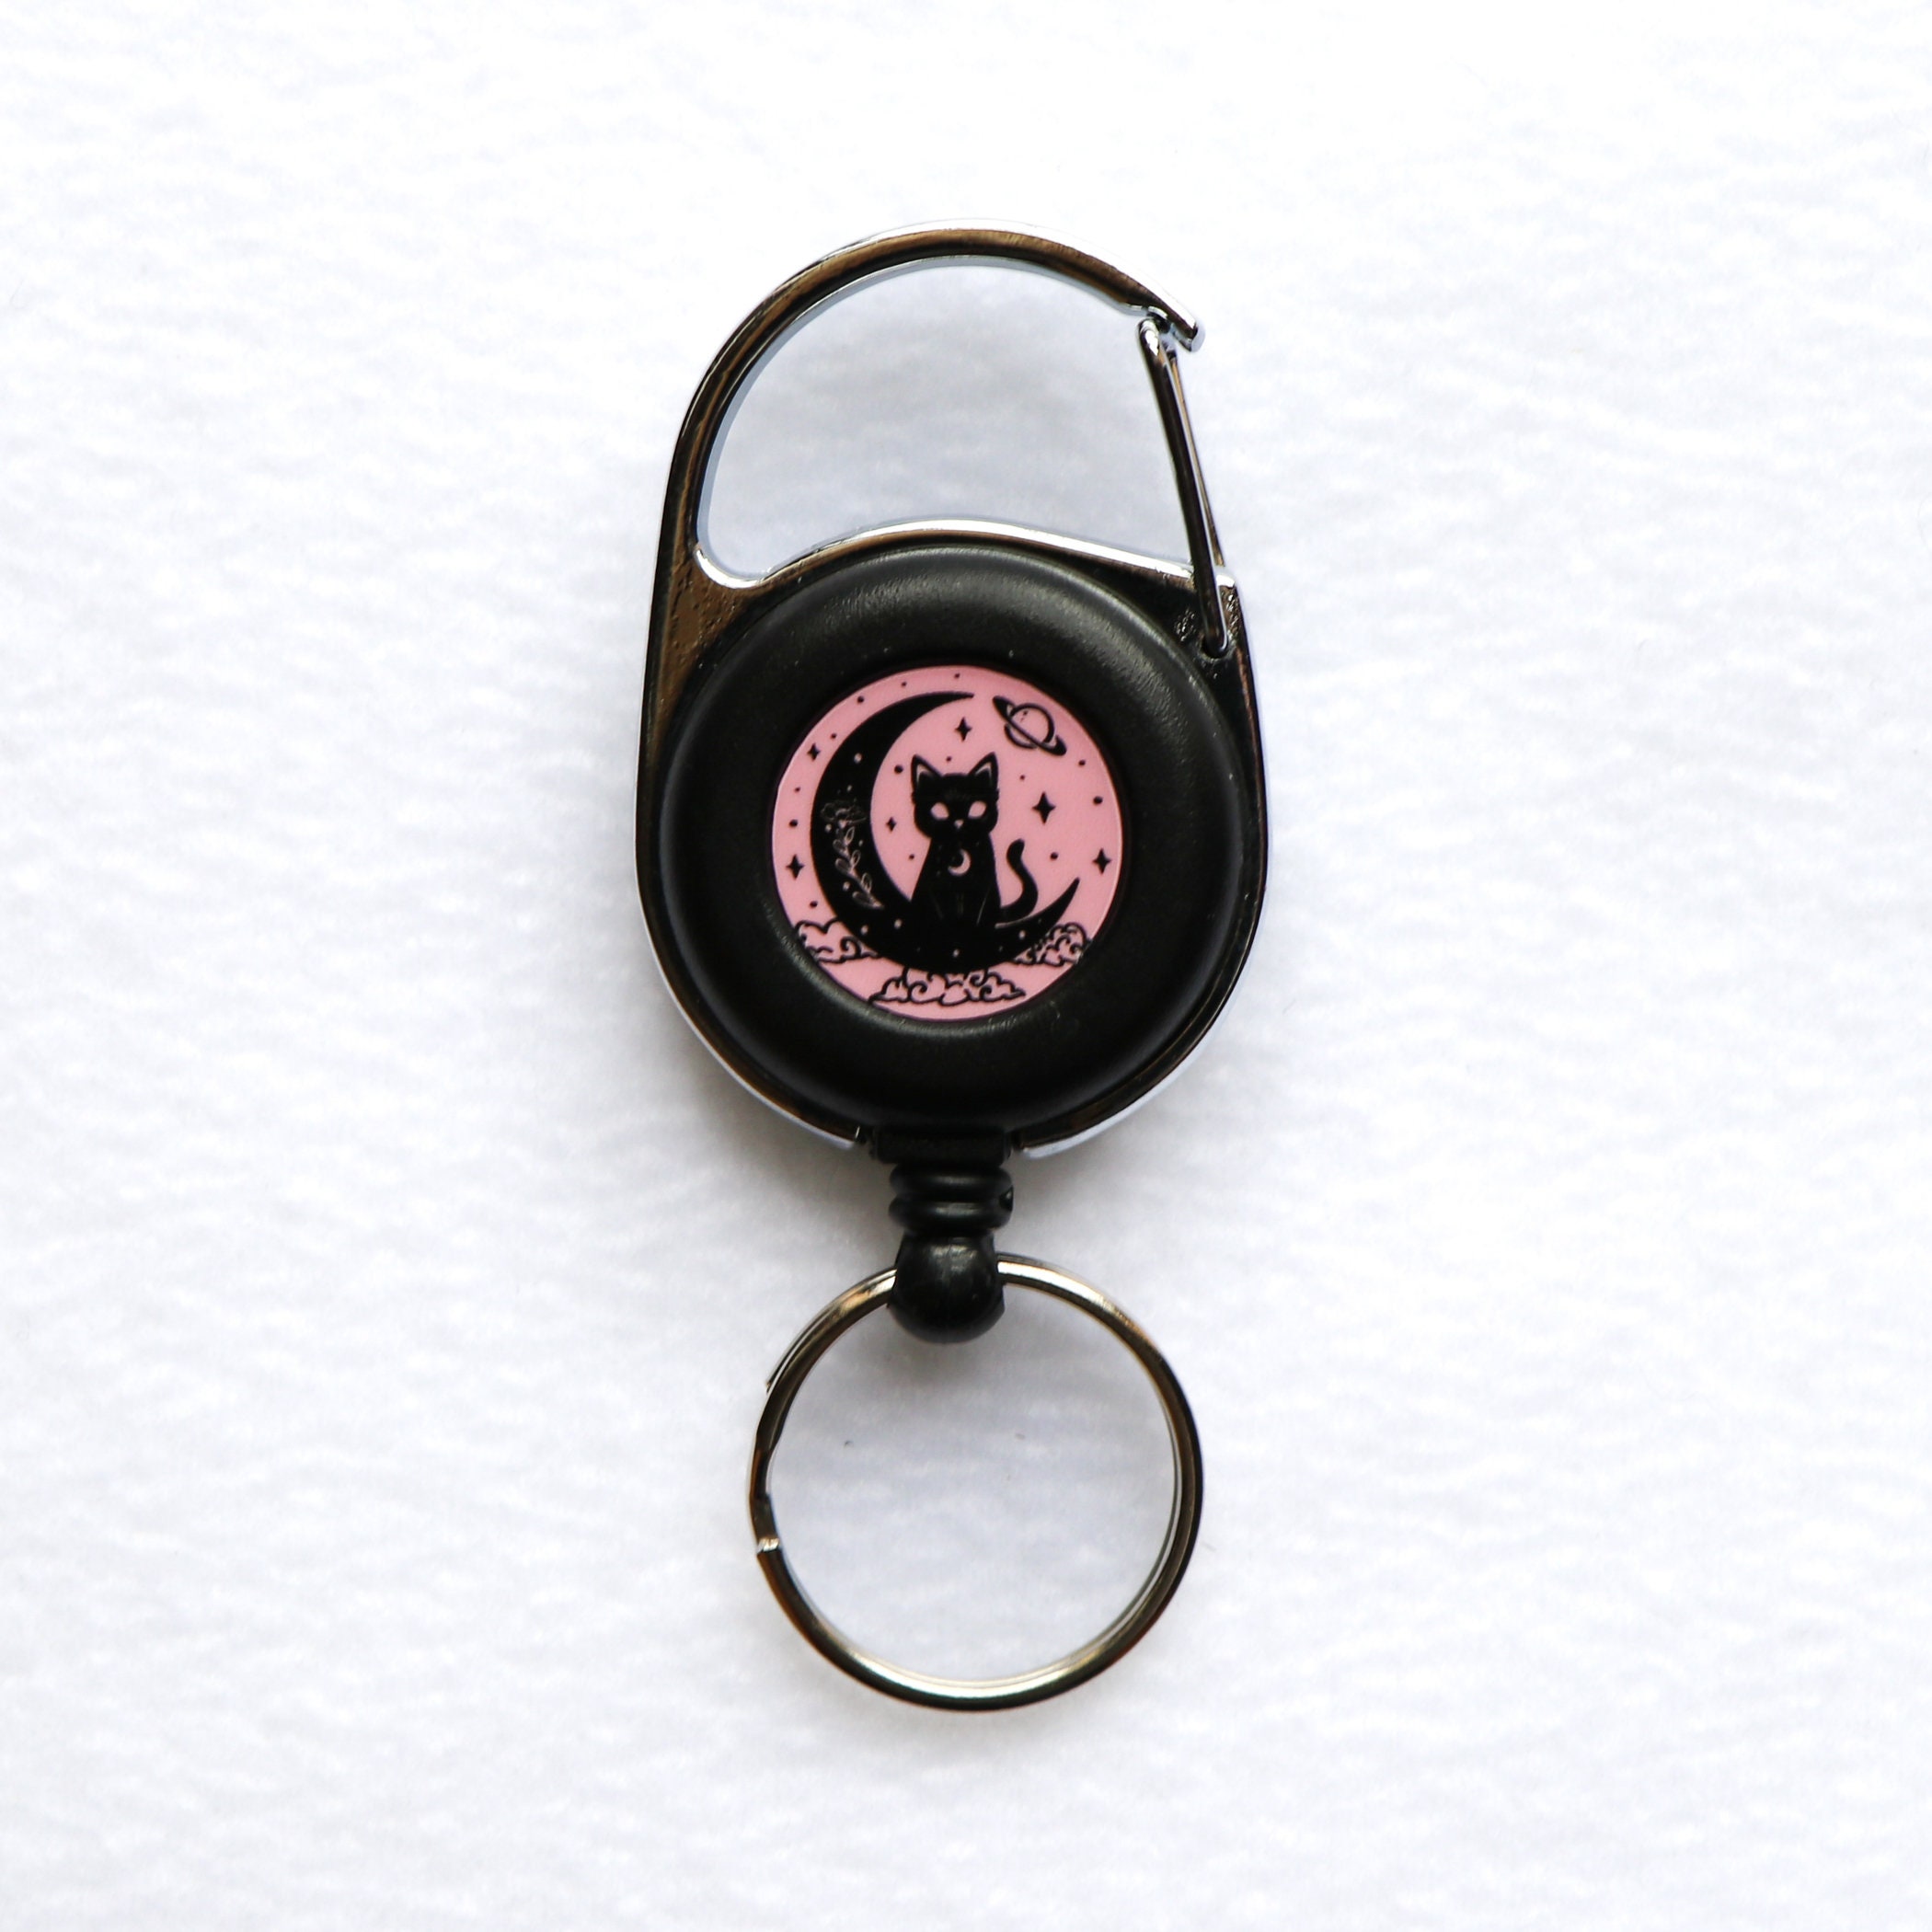 Manfiter Retractable Key Chain for Man Woman Key Ring Chain with